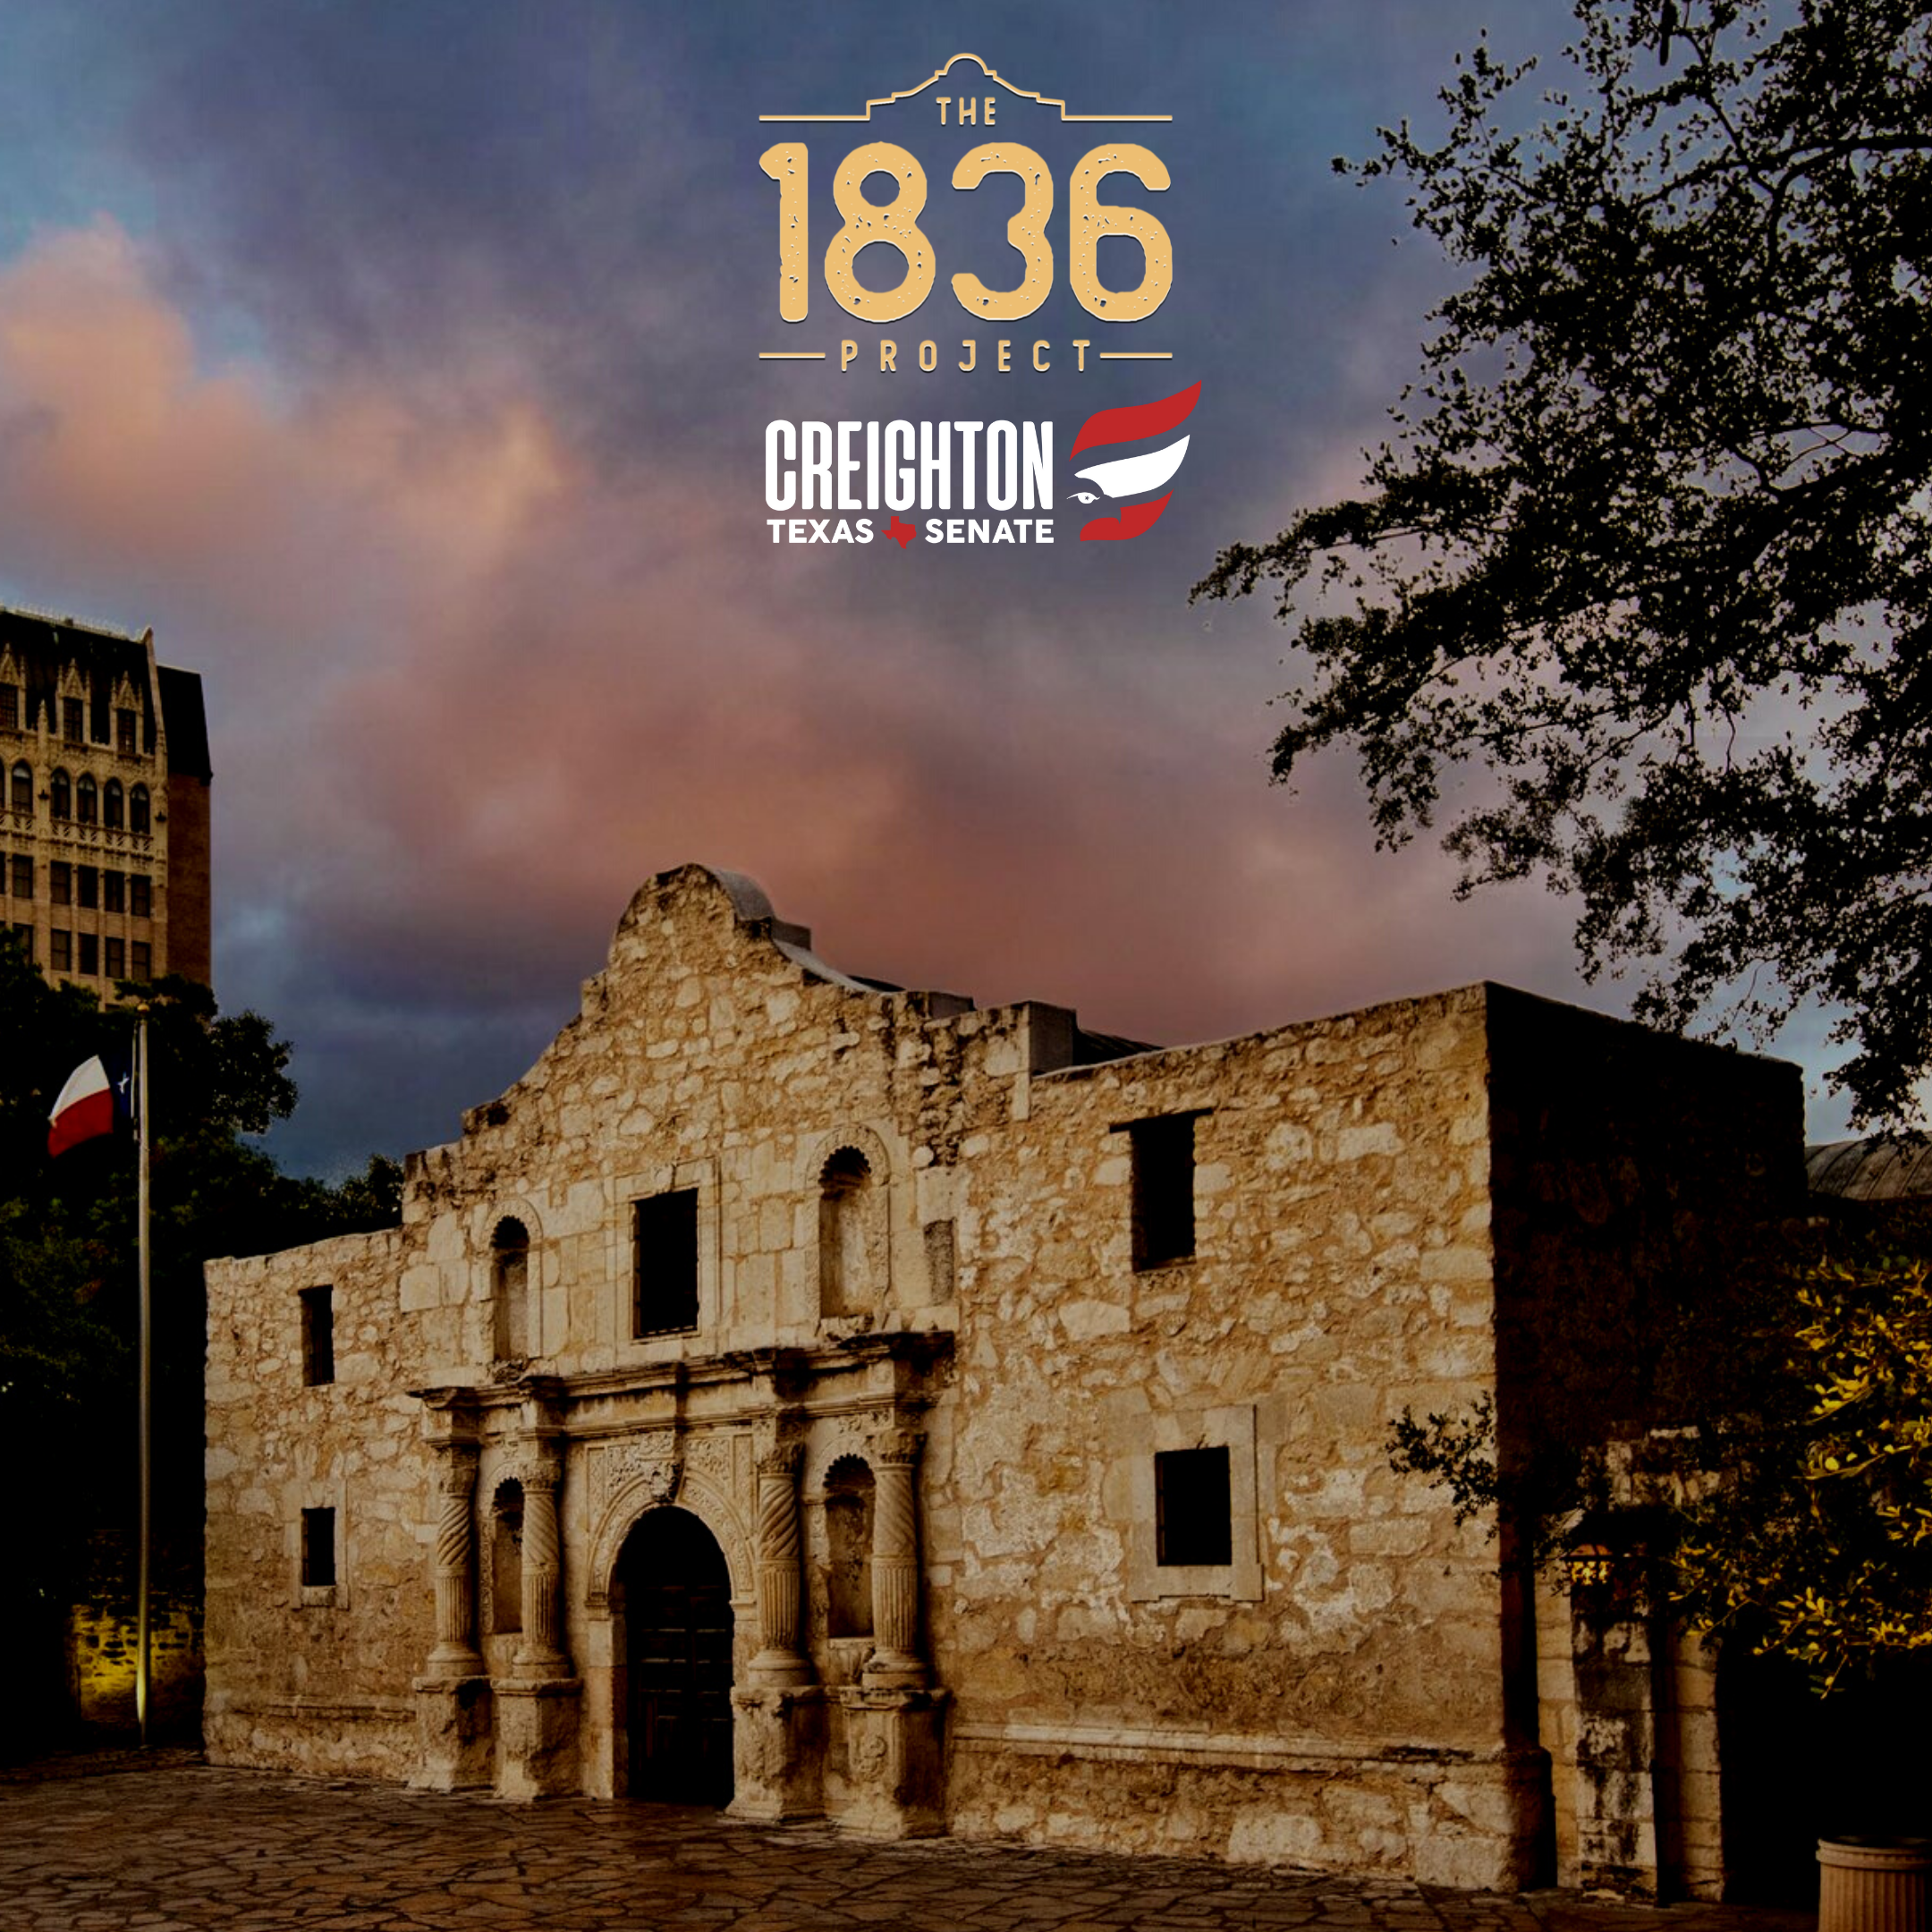 The 1836 Project Committee Meets at The Alamo